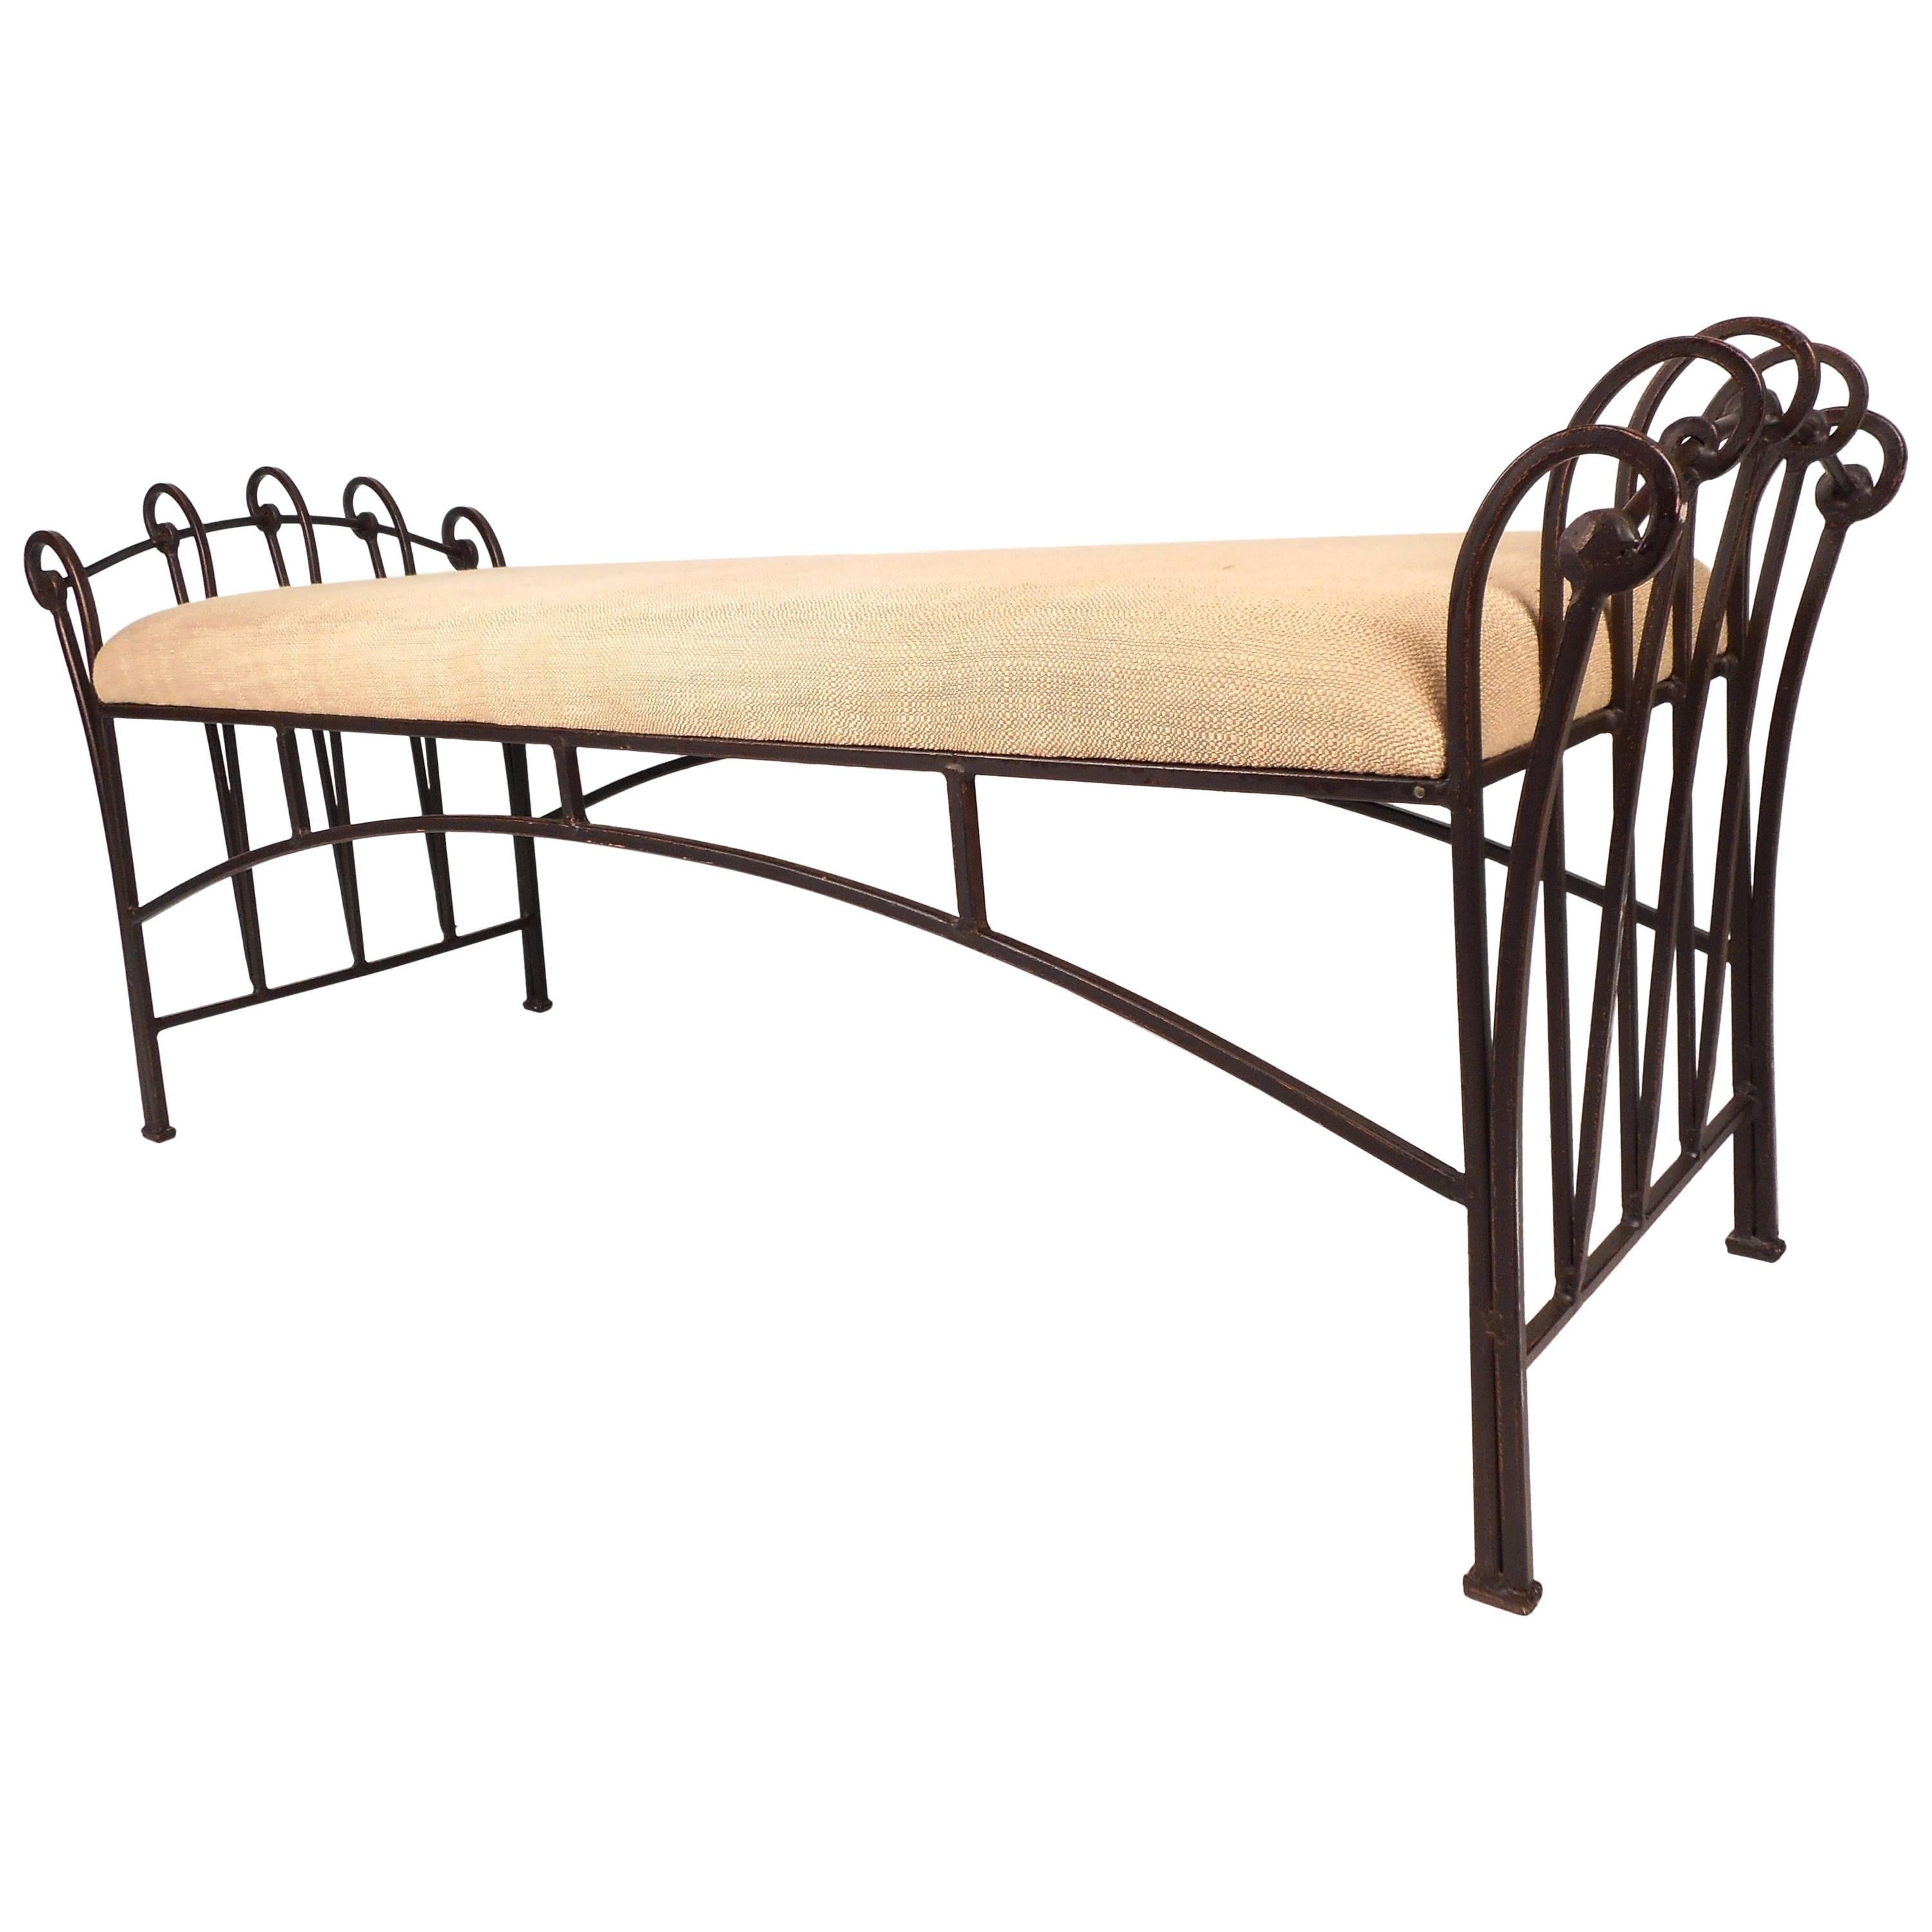 Vintage Wrought Iron Upholstered Bench